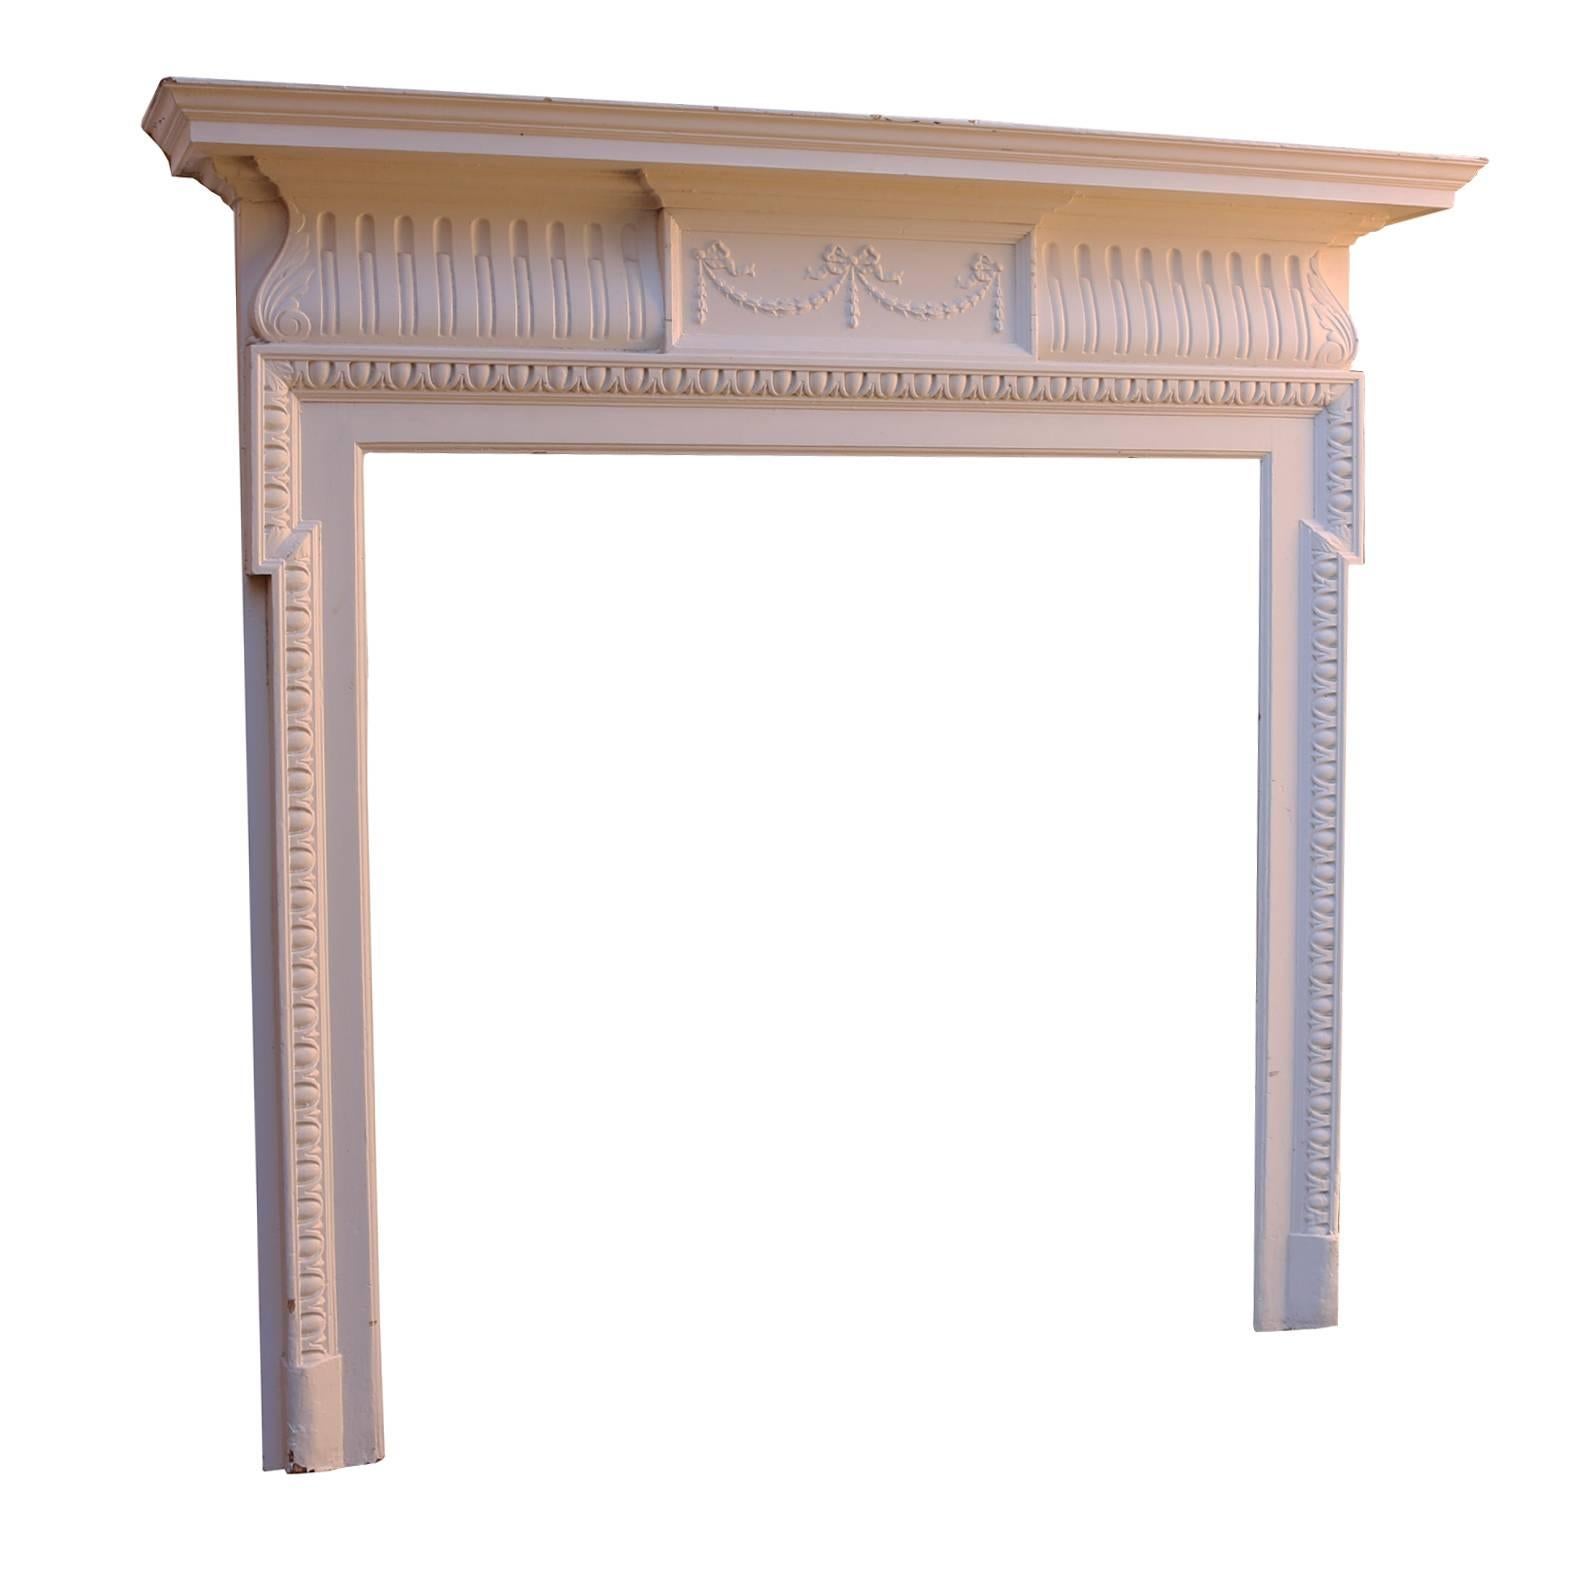 Late 19th century painted pine and composition fire surround. 
Measures: Opening height 102.5 cm. Opening width 103 cm.